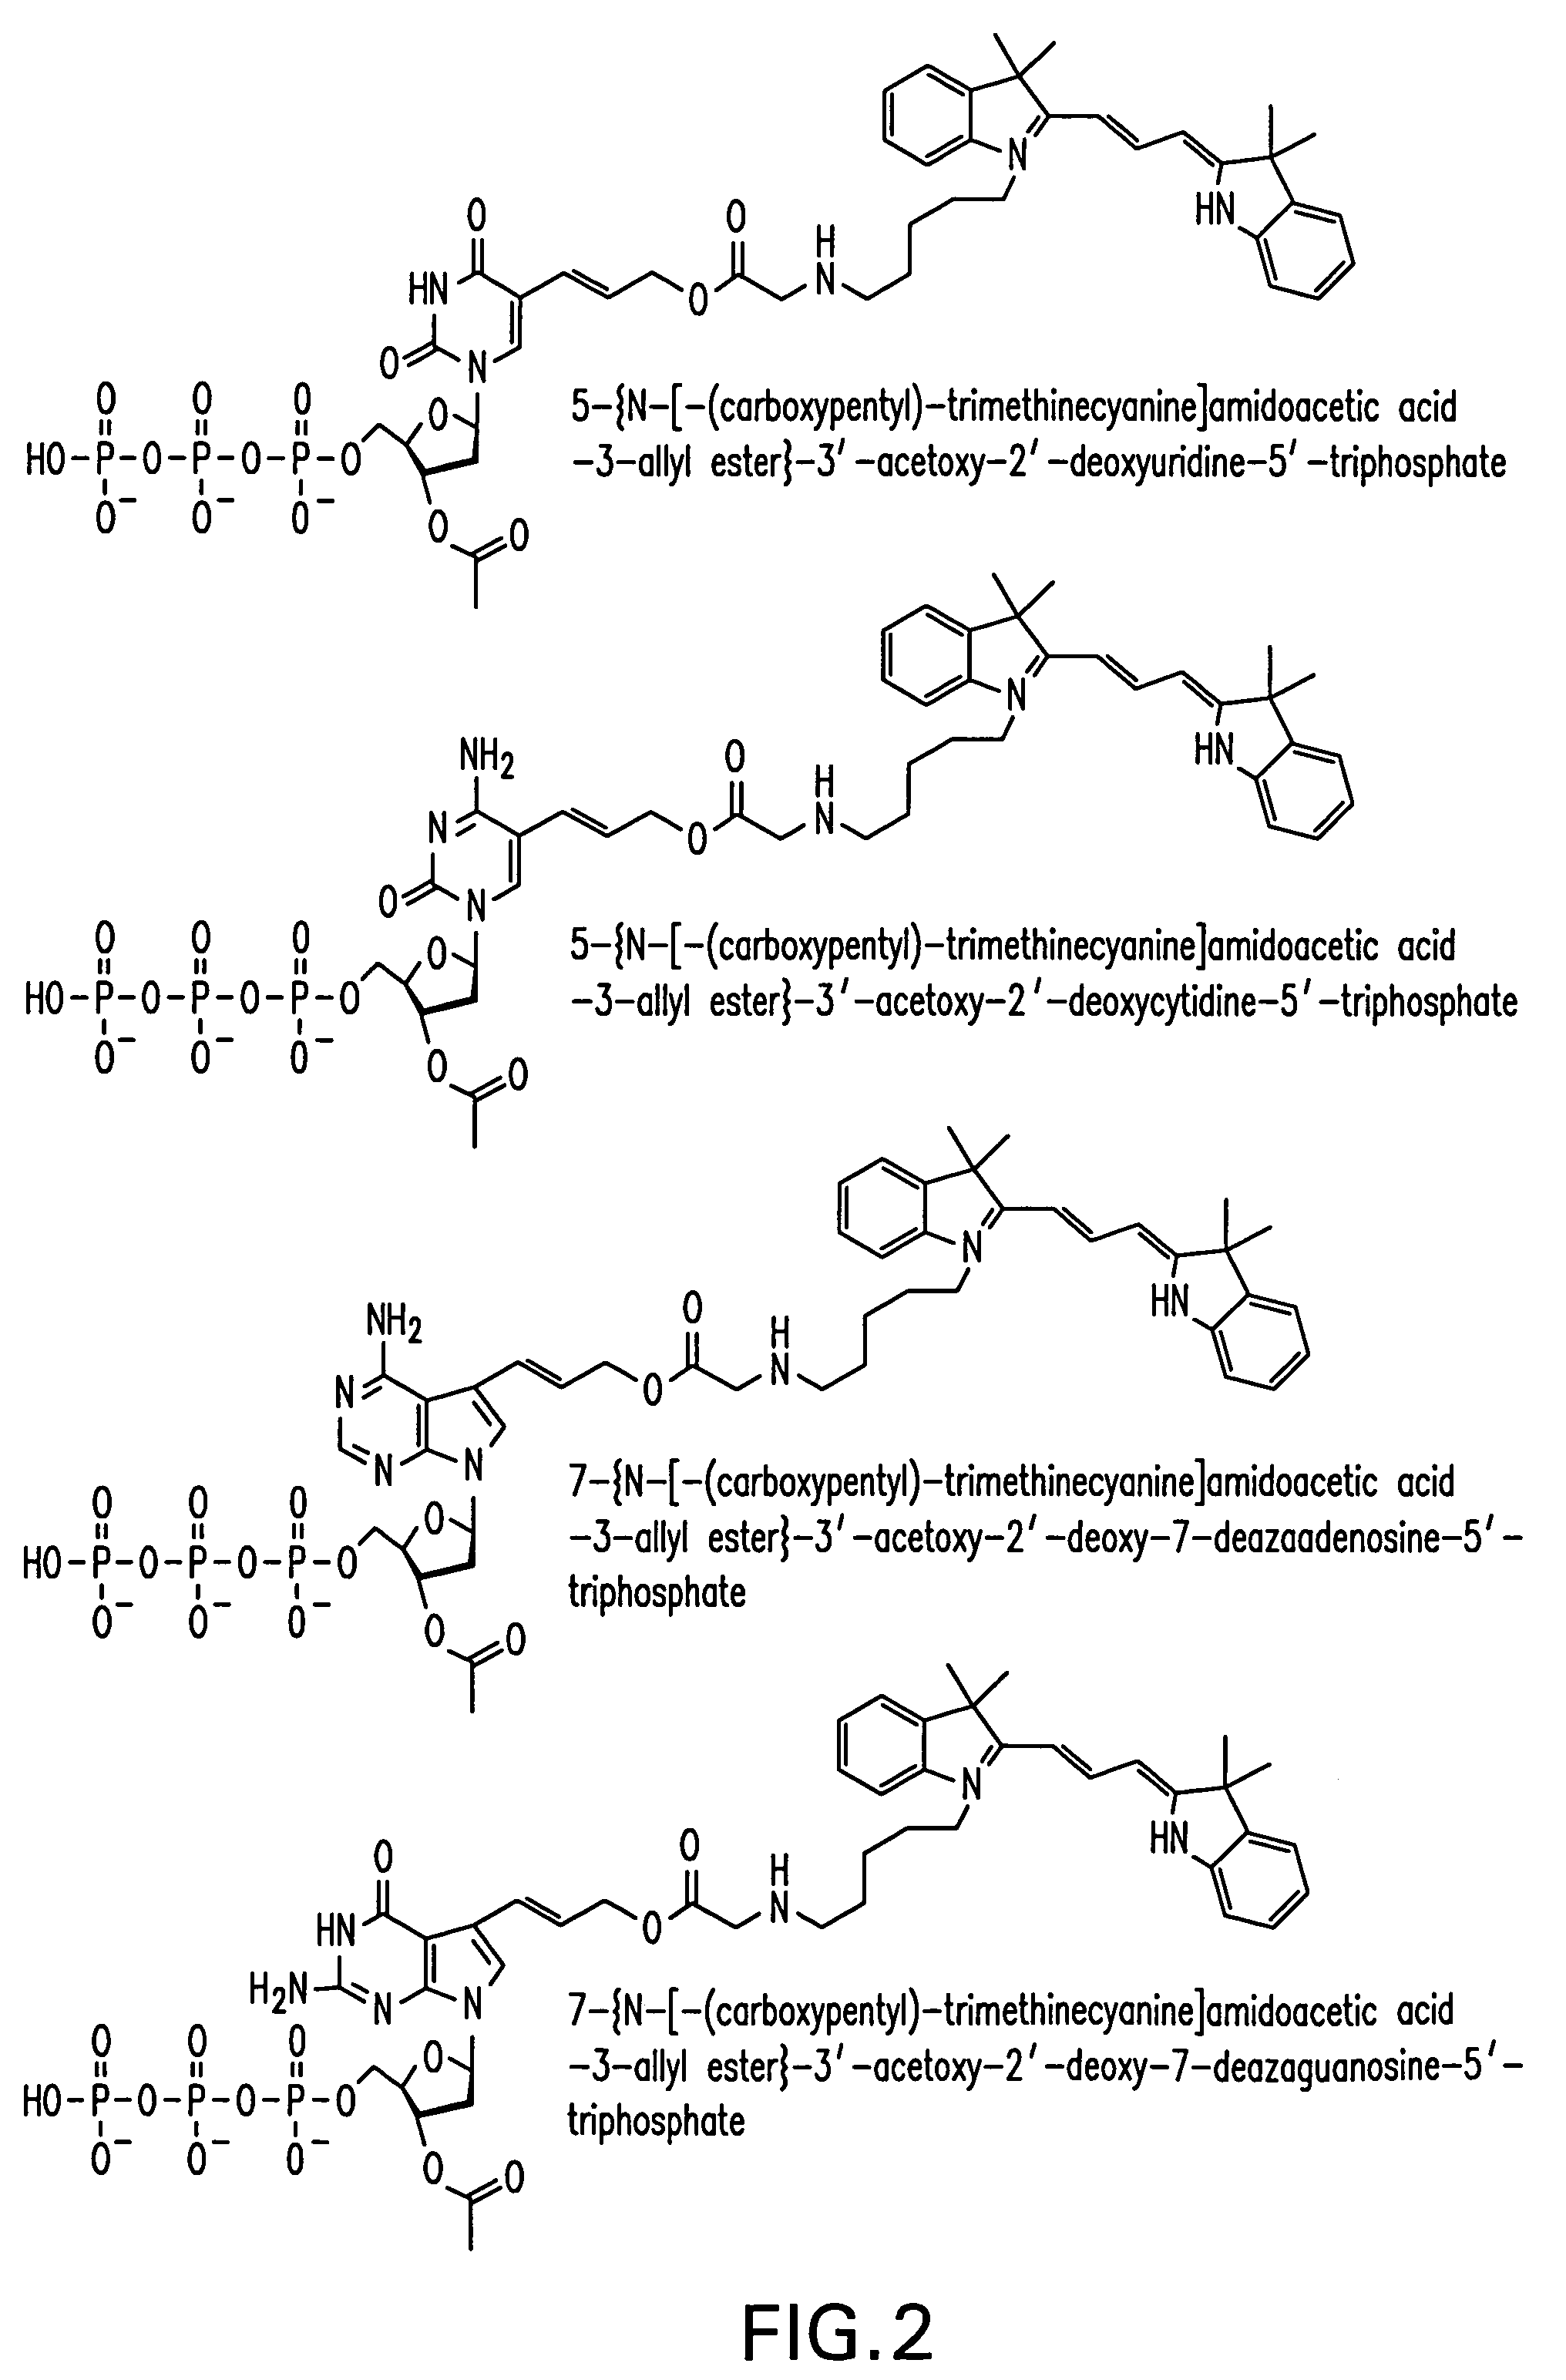 Nucleotide analogues comprising a reporter moiety and a polymerase enzyme blocking moiety